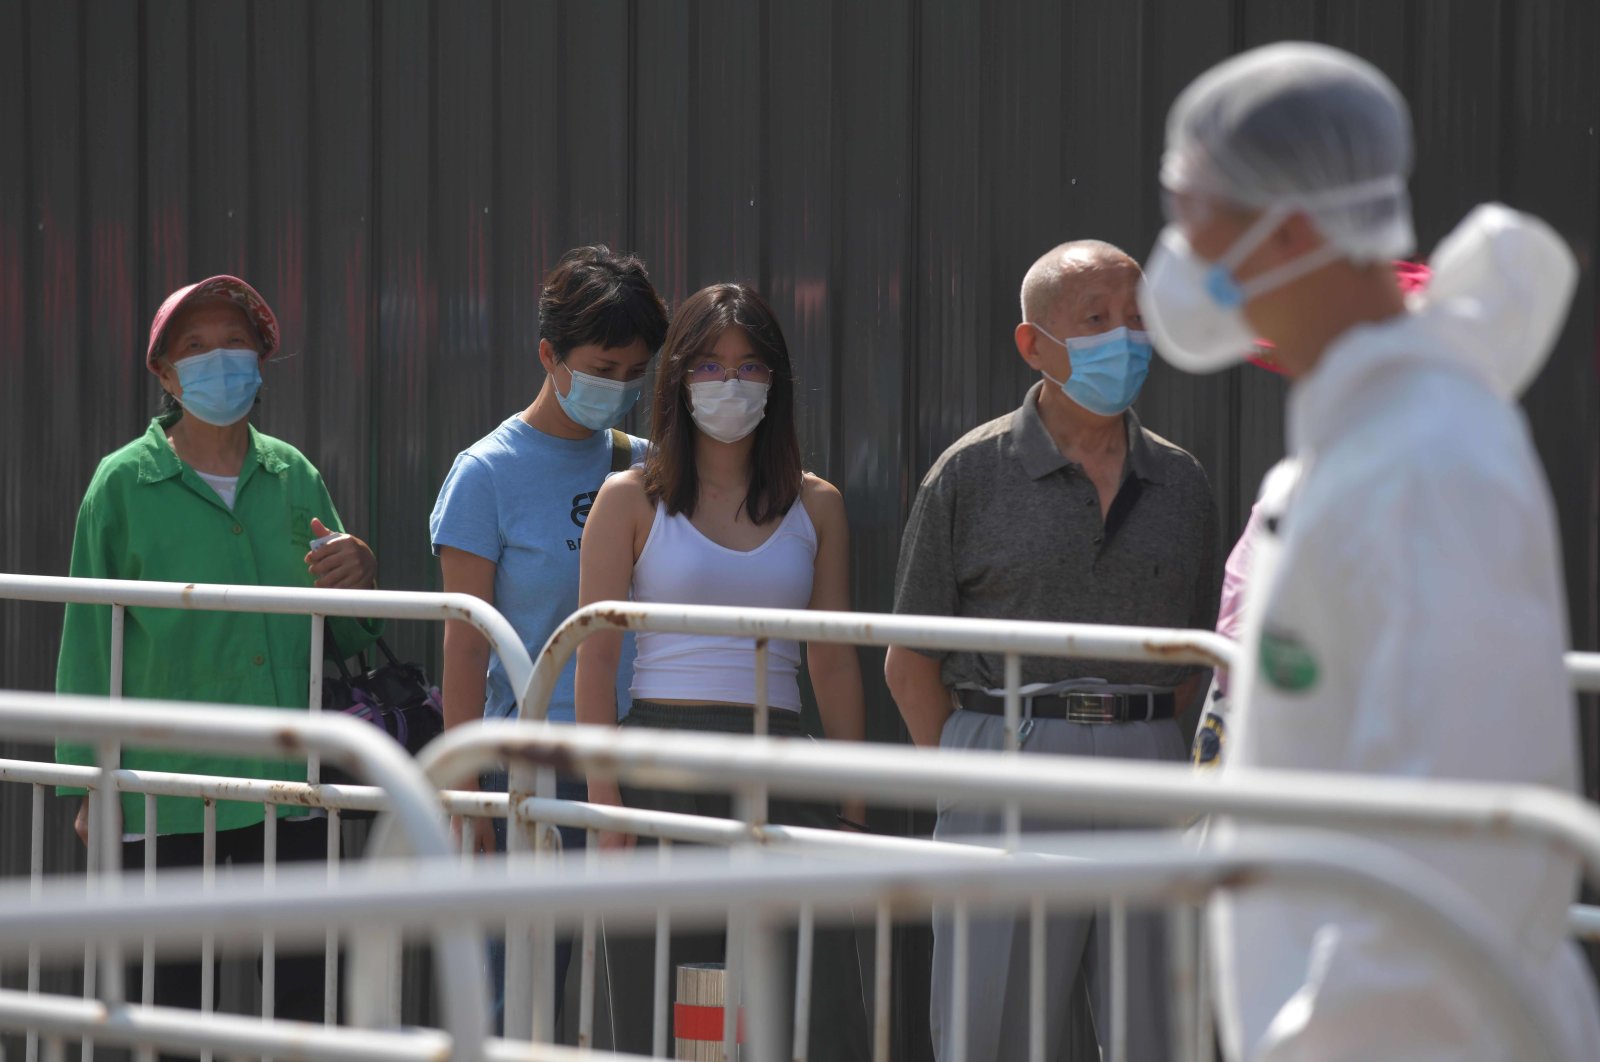 In this file photo people wait in line to undergo COVID-19 coronavirus swab tests at a testing station, Beijing, June 30, 2020. (AFP Photo)